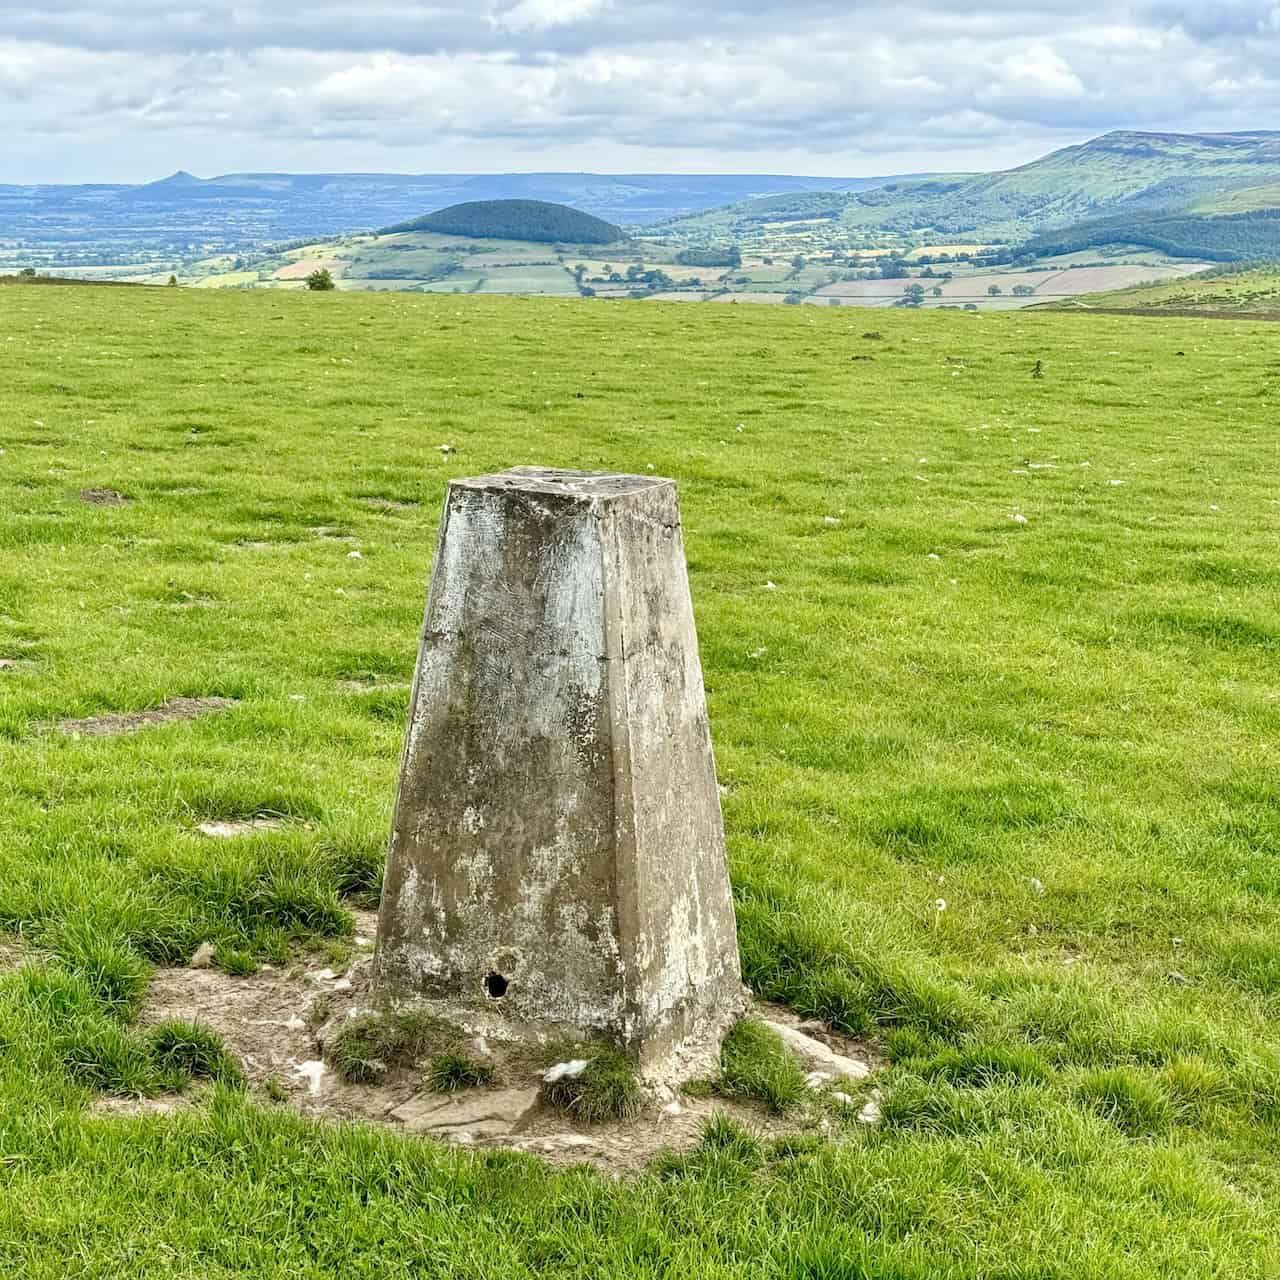 This is the triangulation pillar just north of the transmission station, standing at 299 metres.